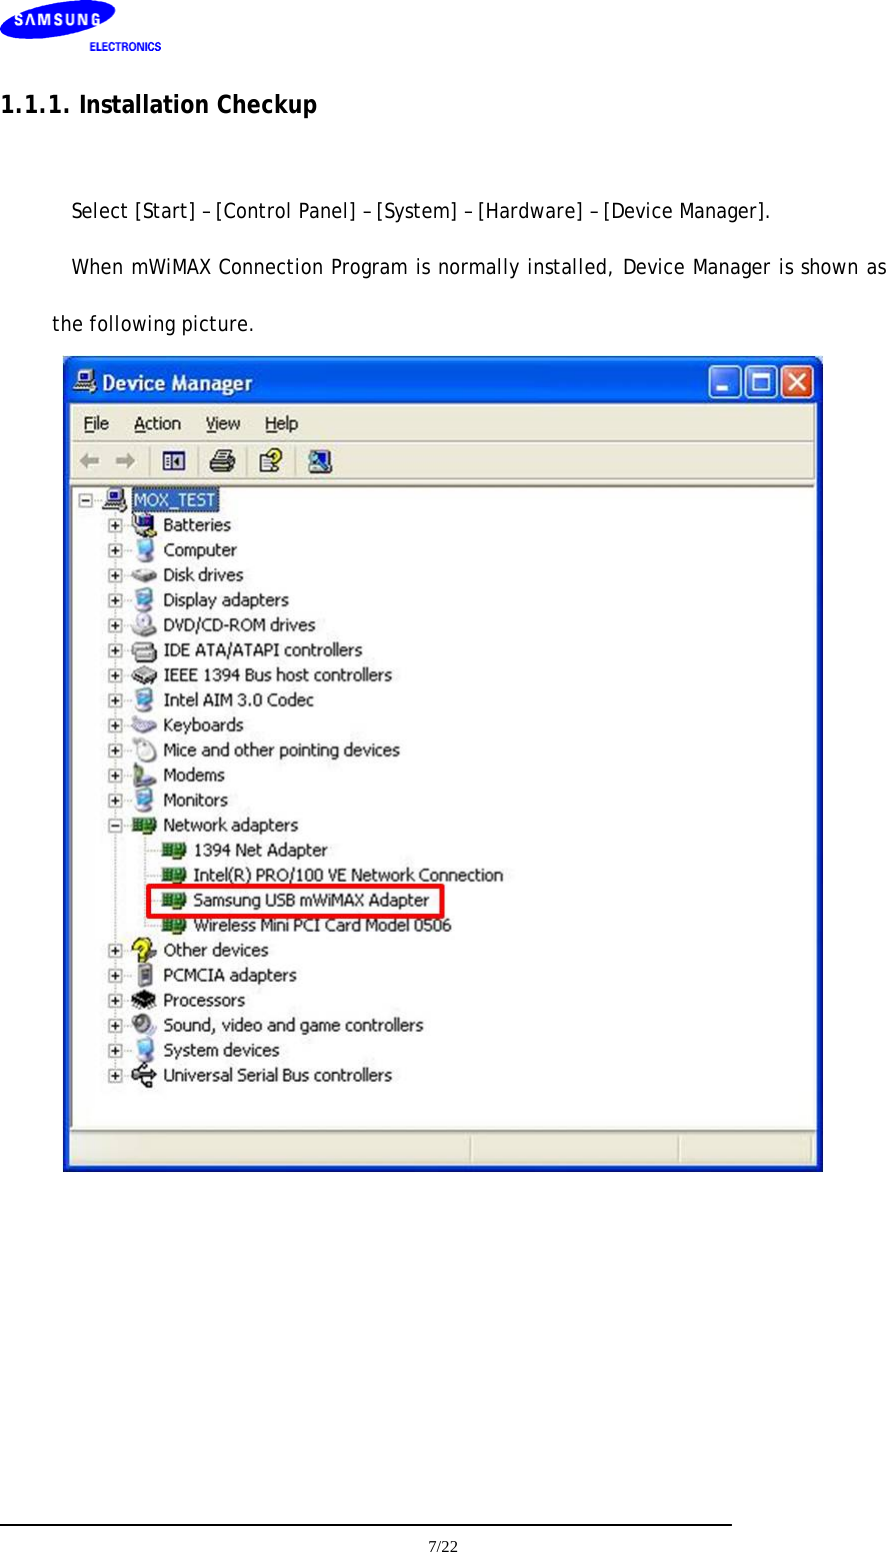     7/22  1.1.1. Installation Checkup  Select [Start] – [Control Panel] – [System] – [Hardware] – [Device Manager]. When mWiMAX Connection Program is normally installed, Device Manager is shown as the following picture.       